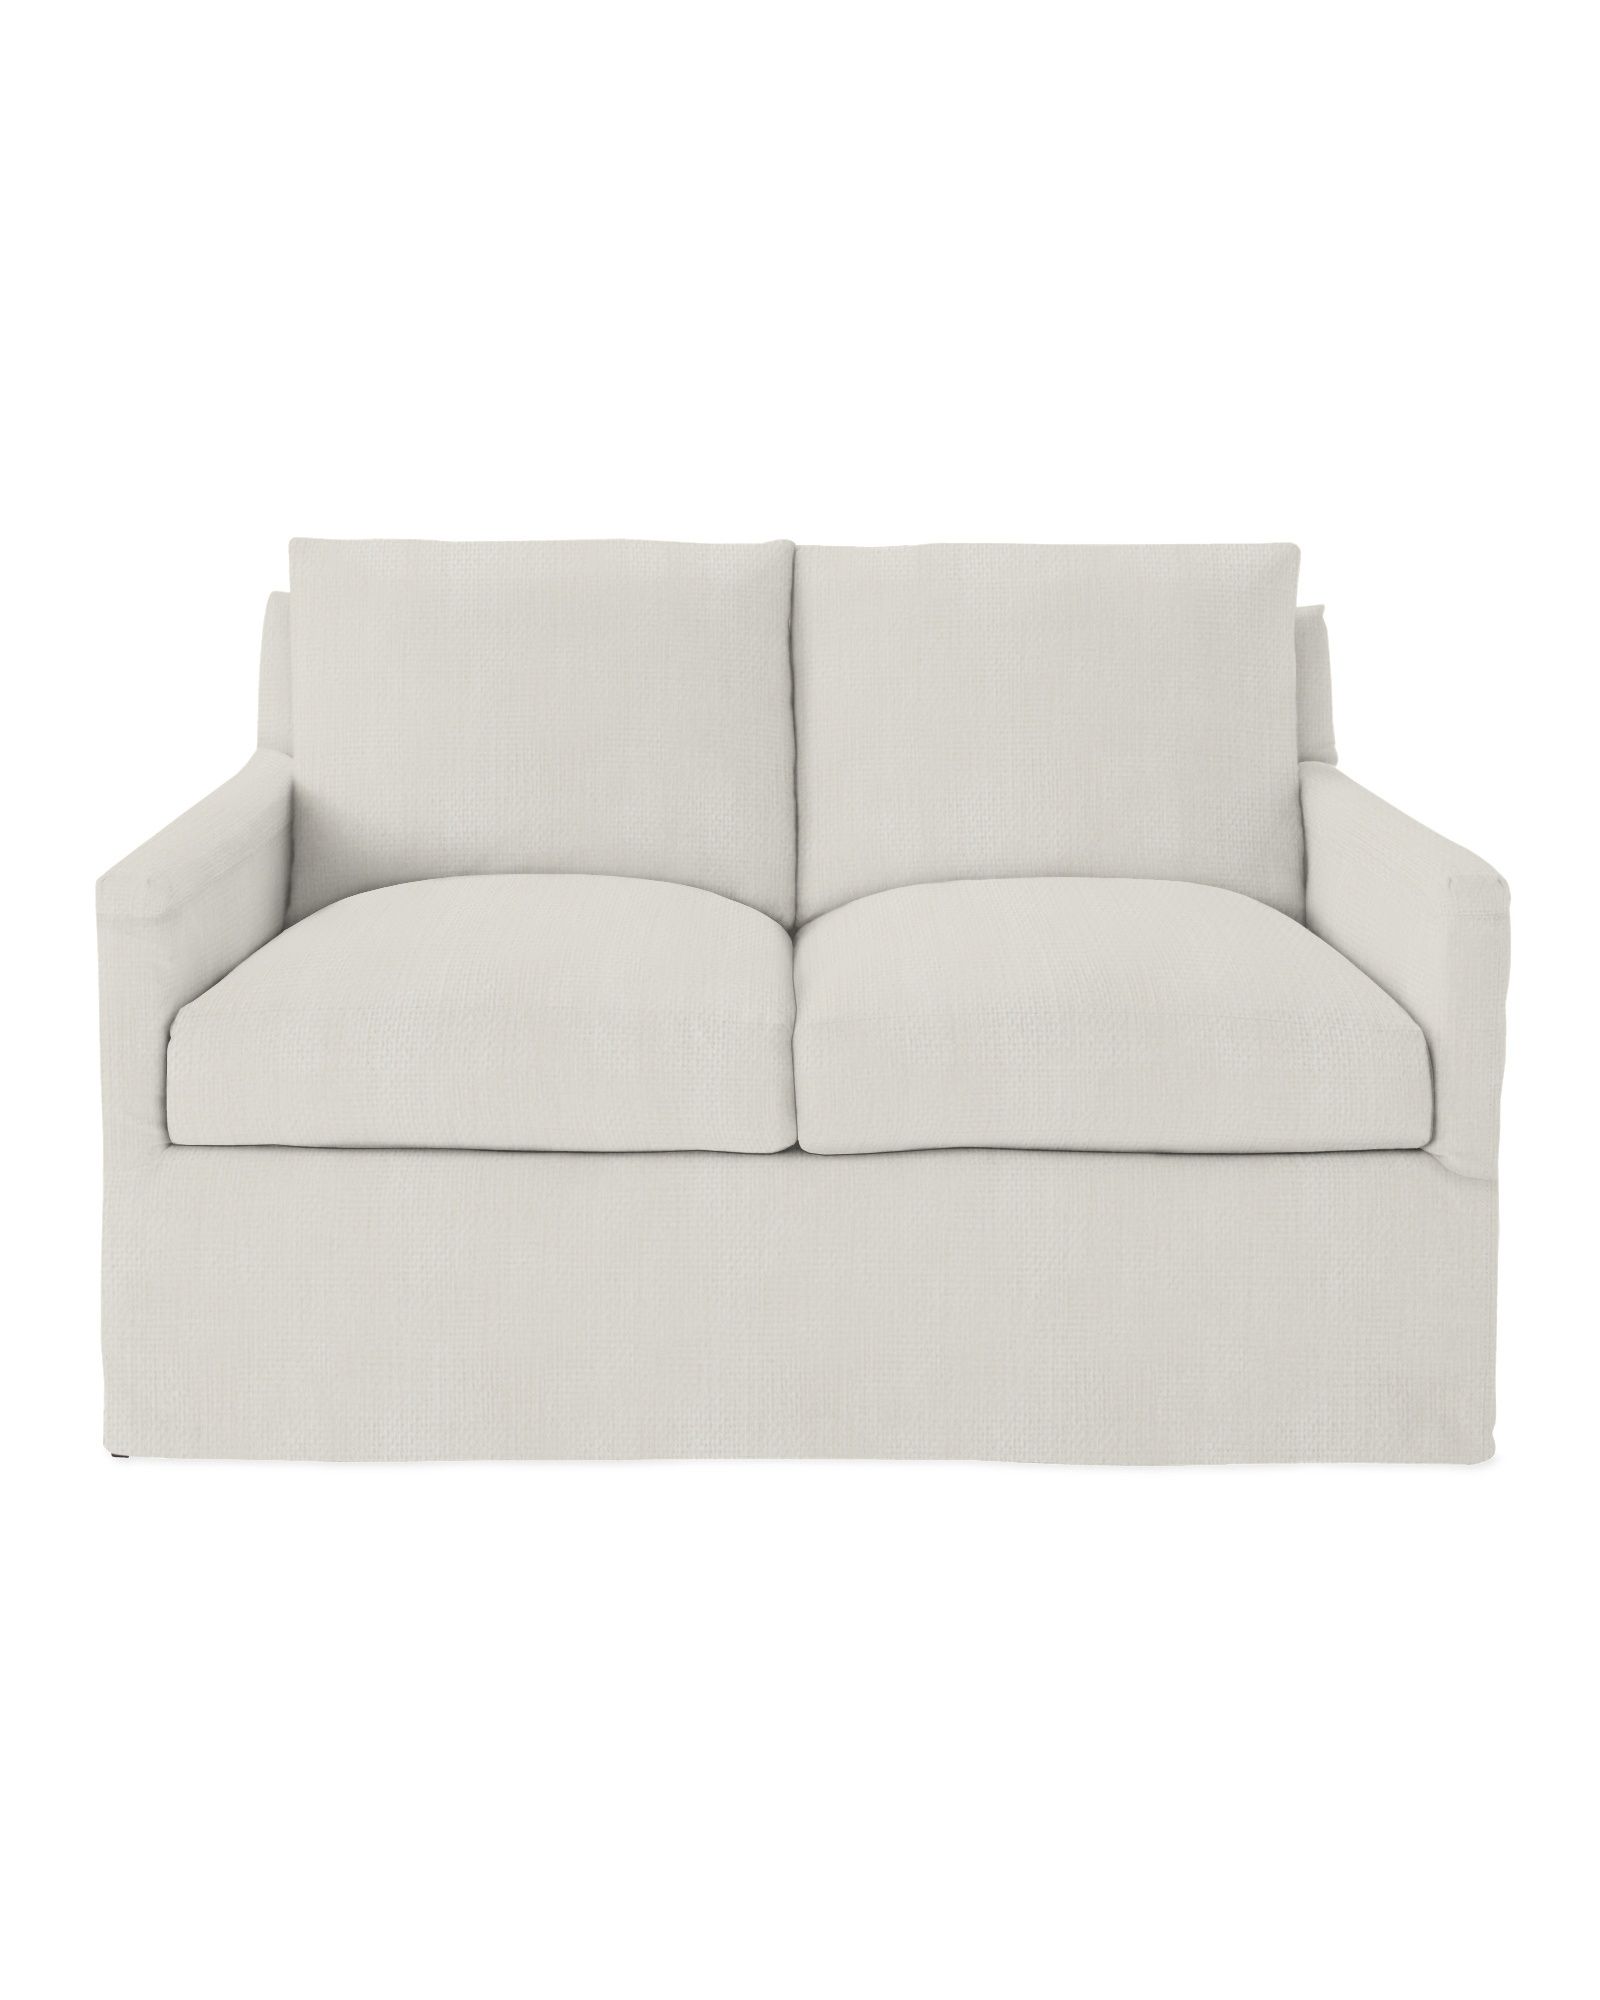 Spruce Street Loveseat – Slipcovered | Serena and Lily